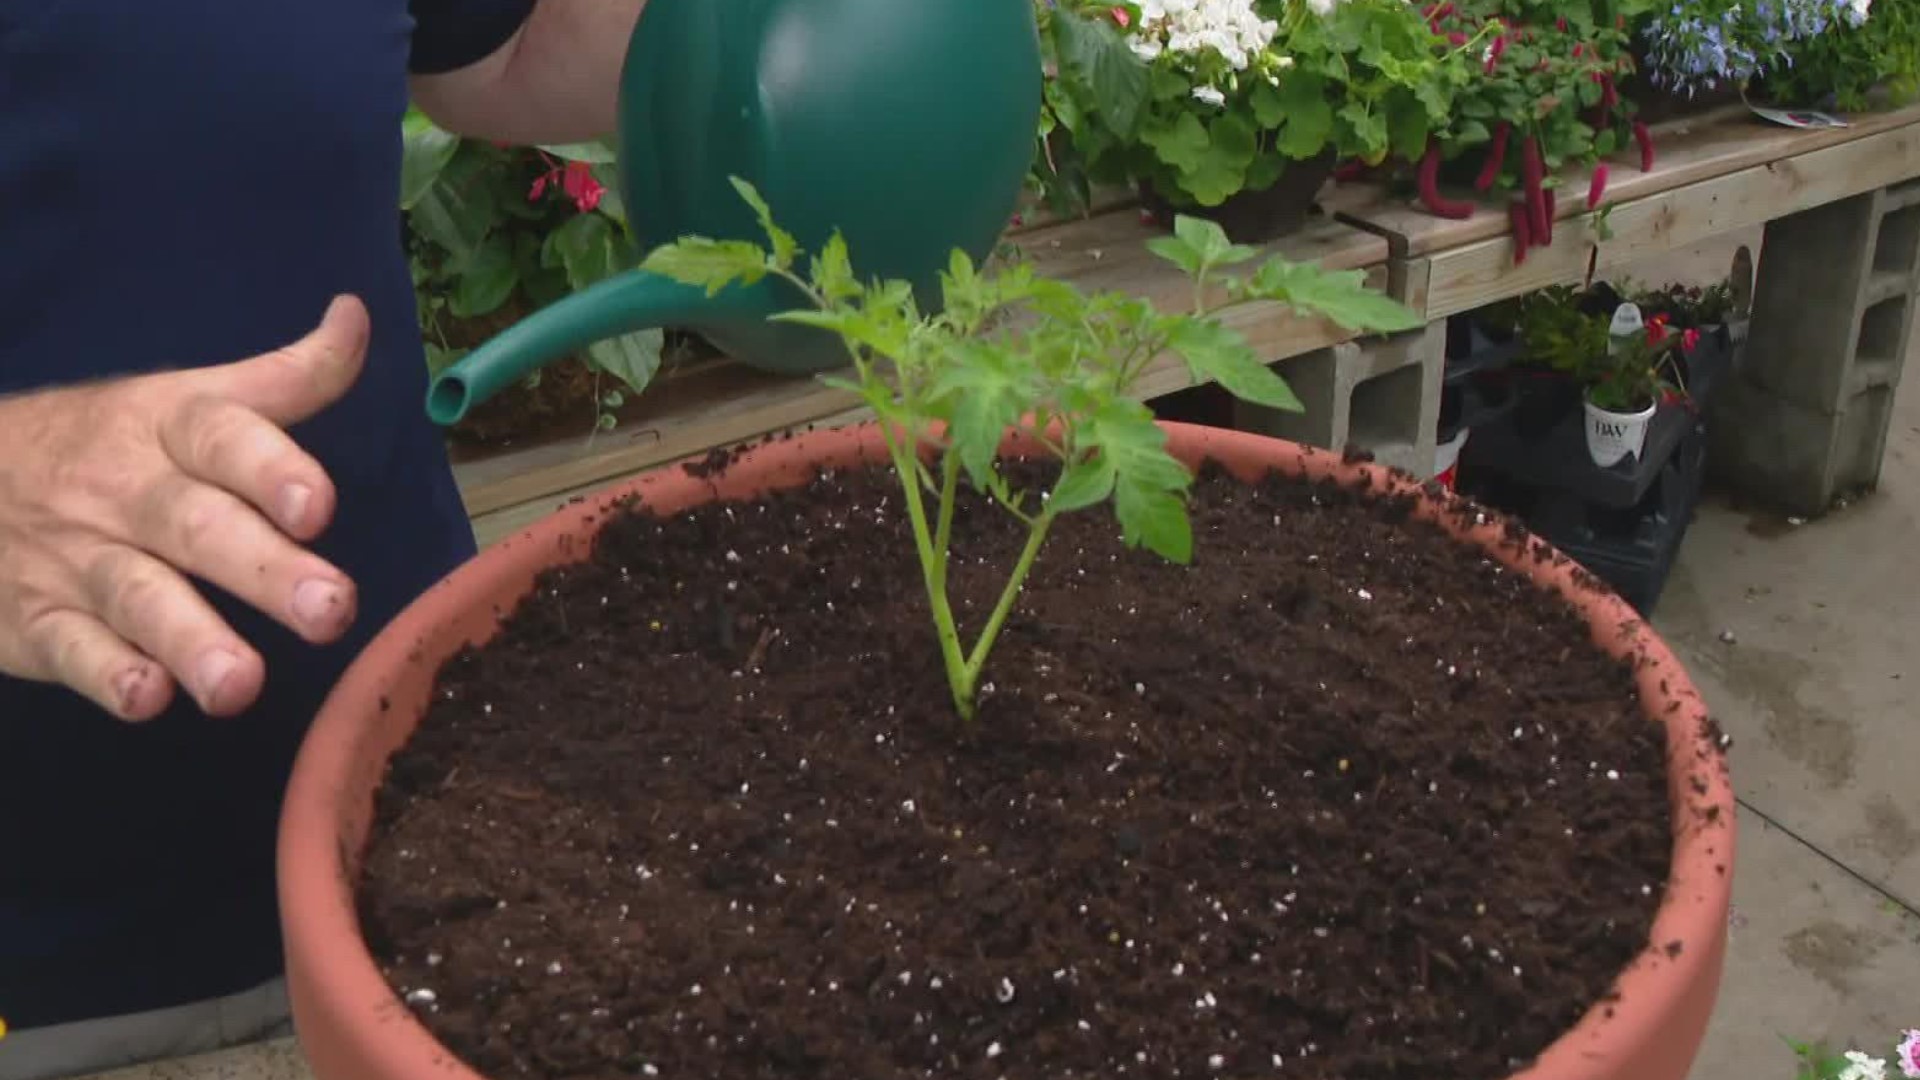 Planting tomatoes in May is a Hoosier tradition.